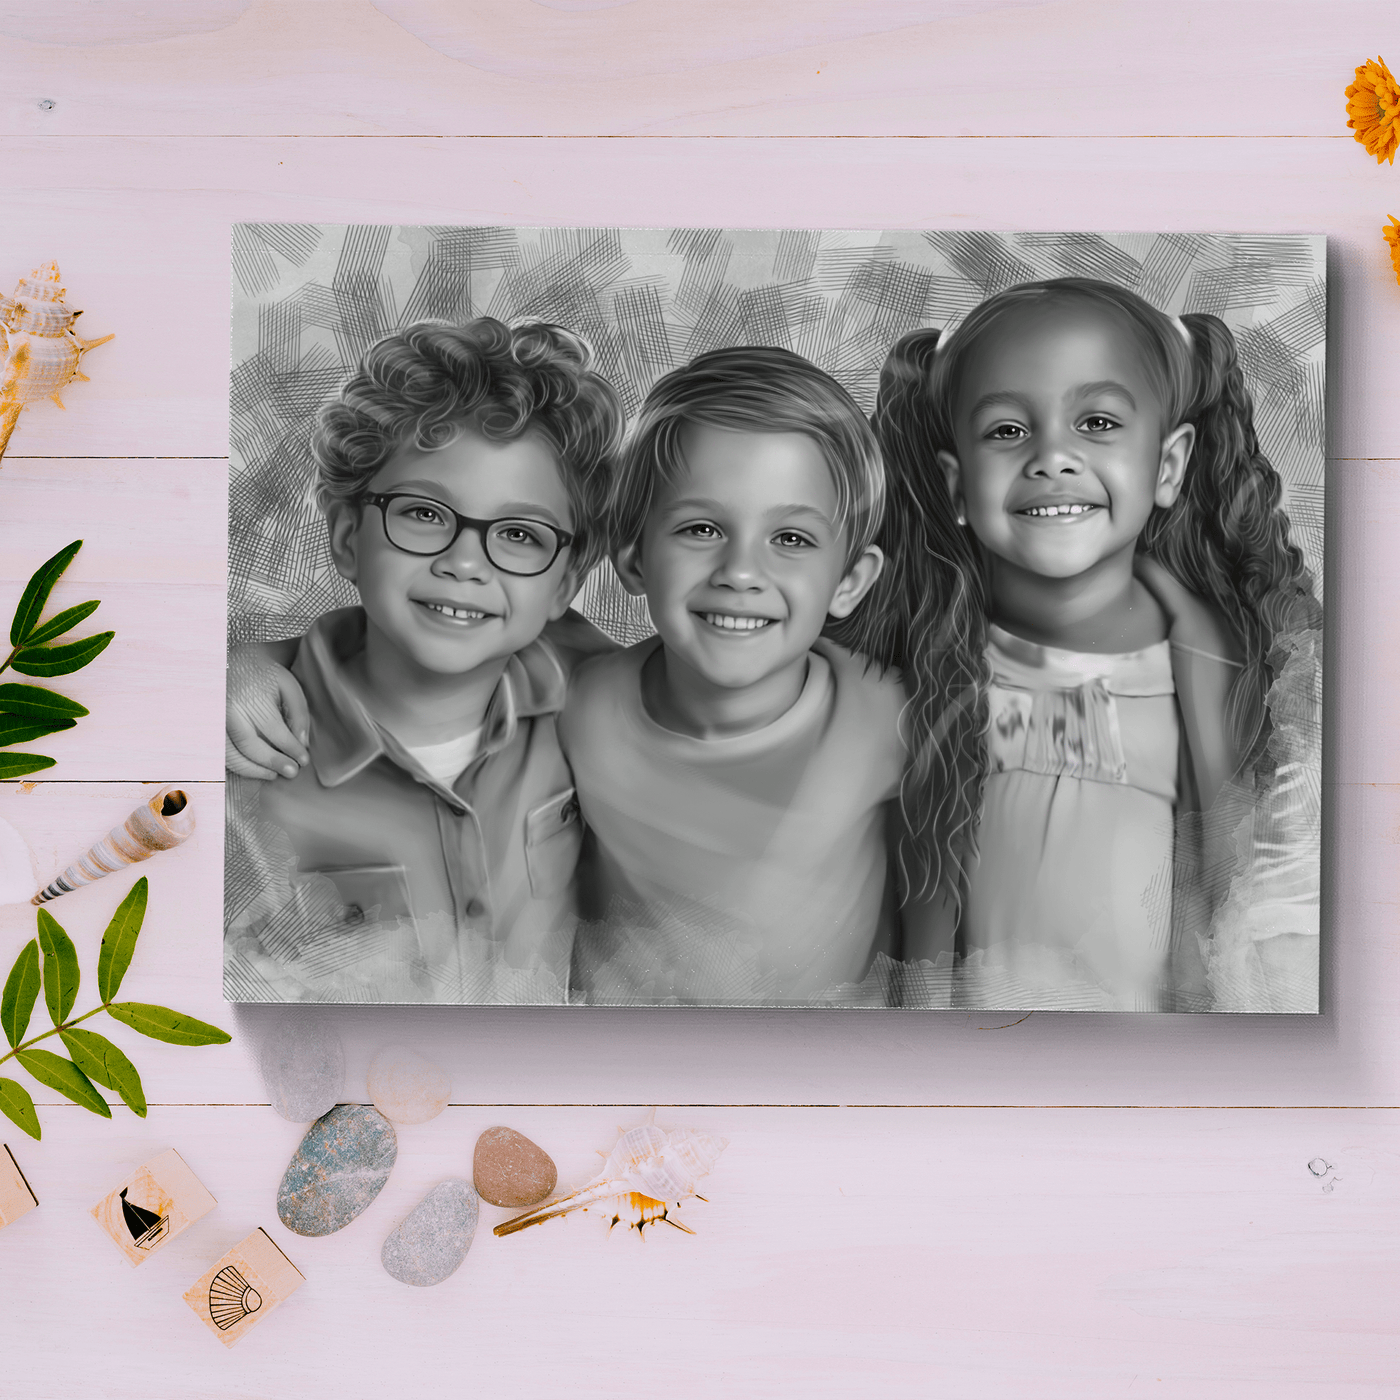 children pencil drawing of an adorable set of friends